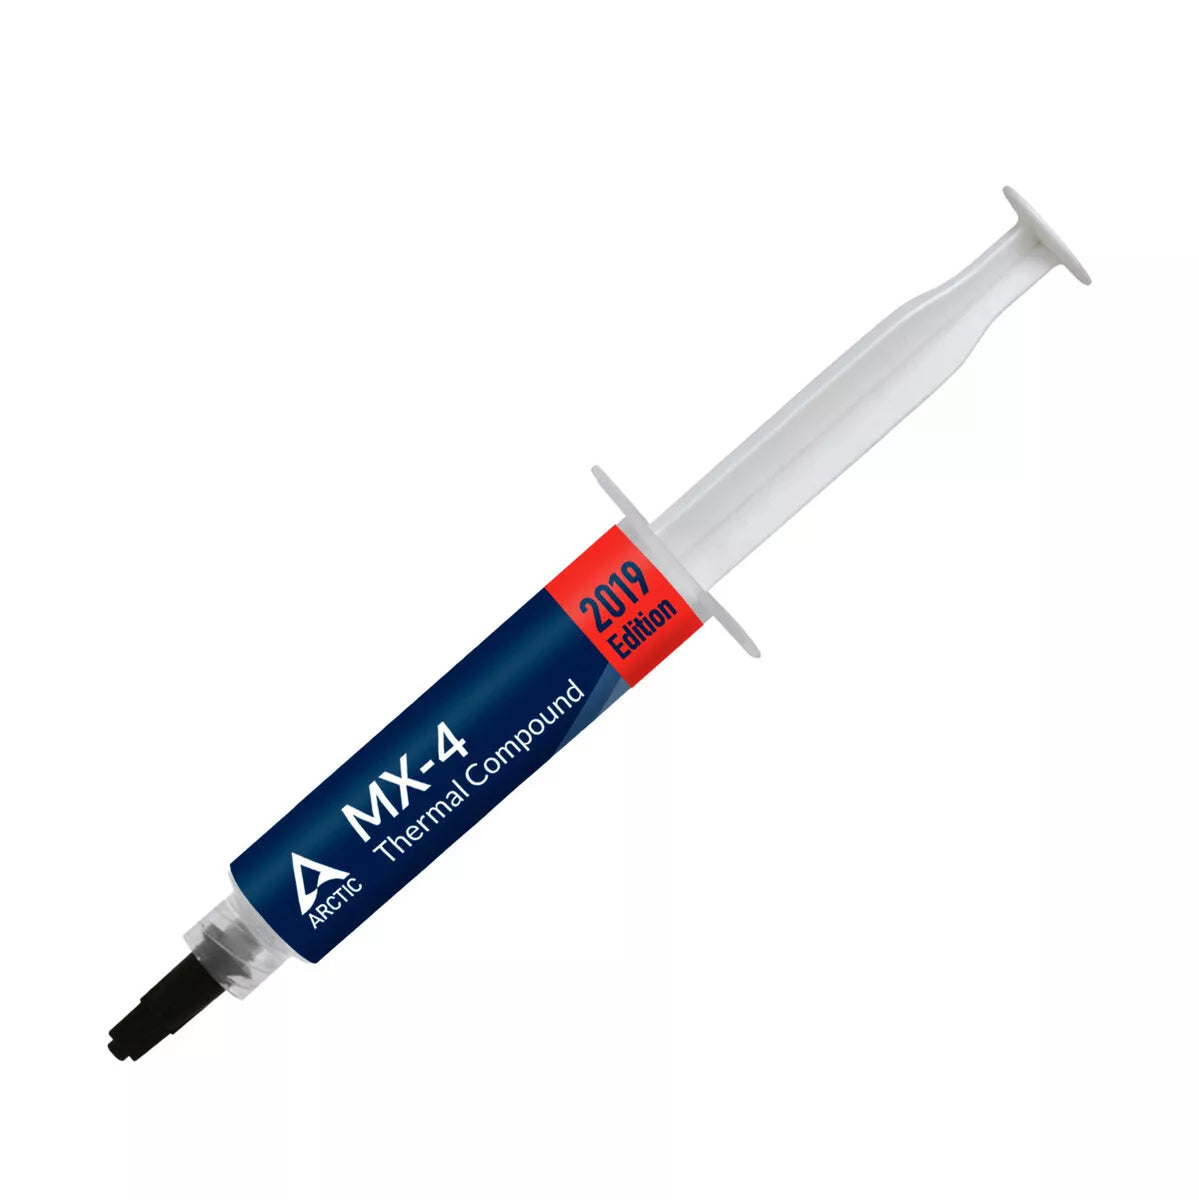 ARCTIC ARCTIC MX-4 20G MX-4 - Thermal paste - Safe and easy application